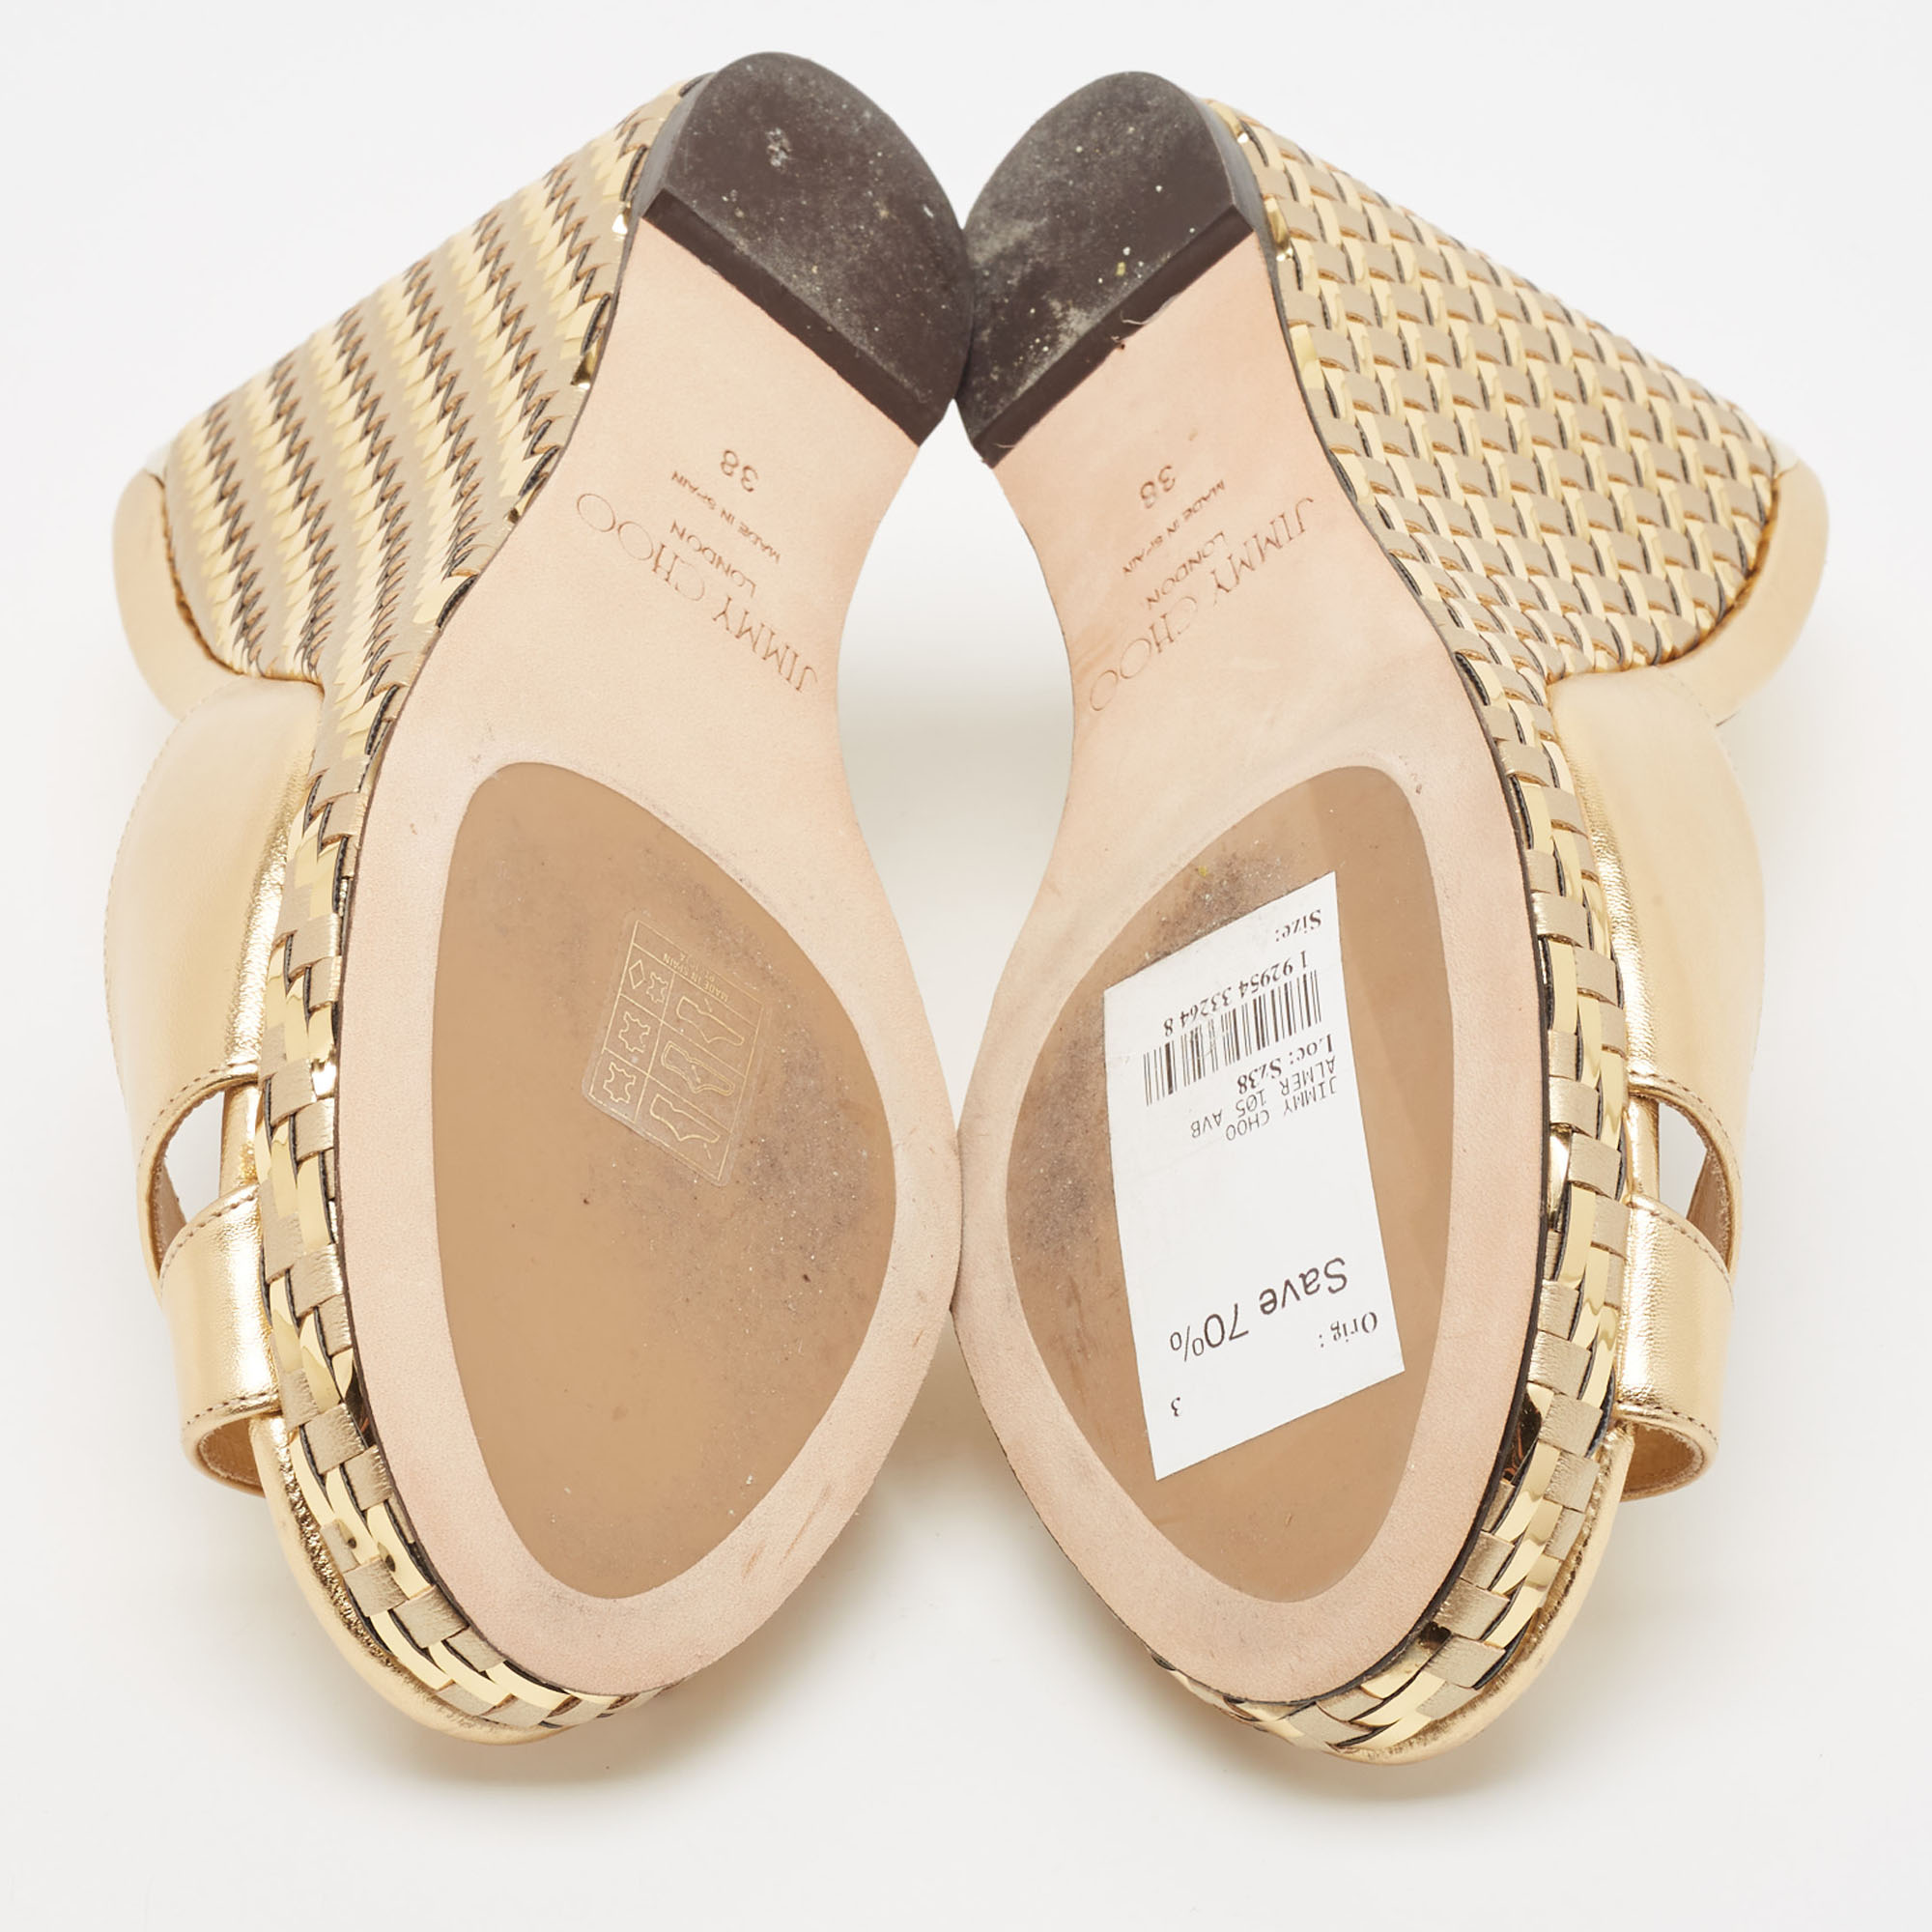 Jimmy Choo Gold Leather Almer Wedge Sandals Size 38